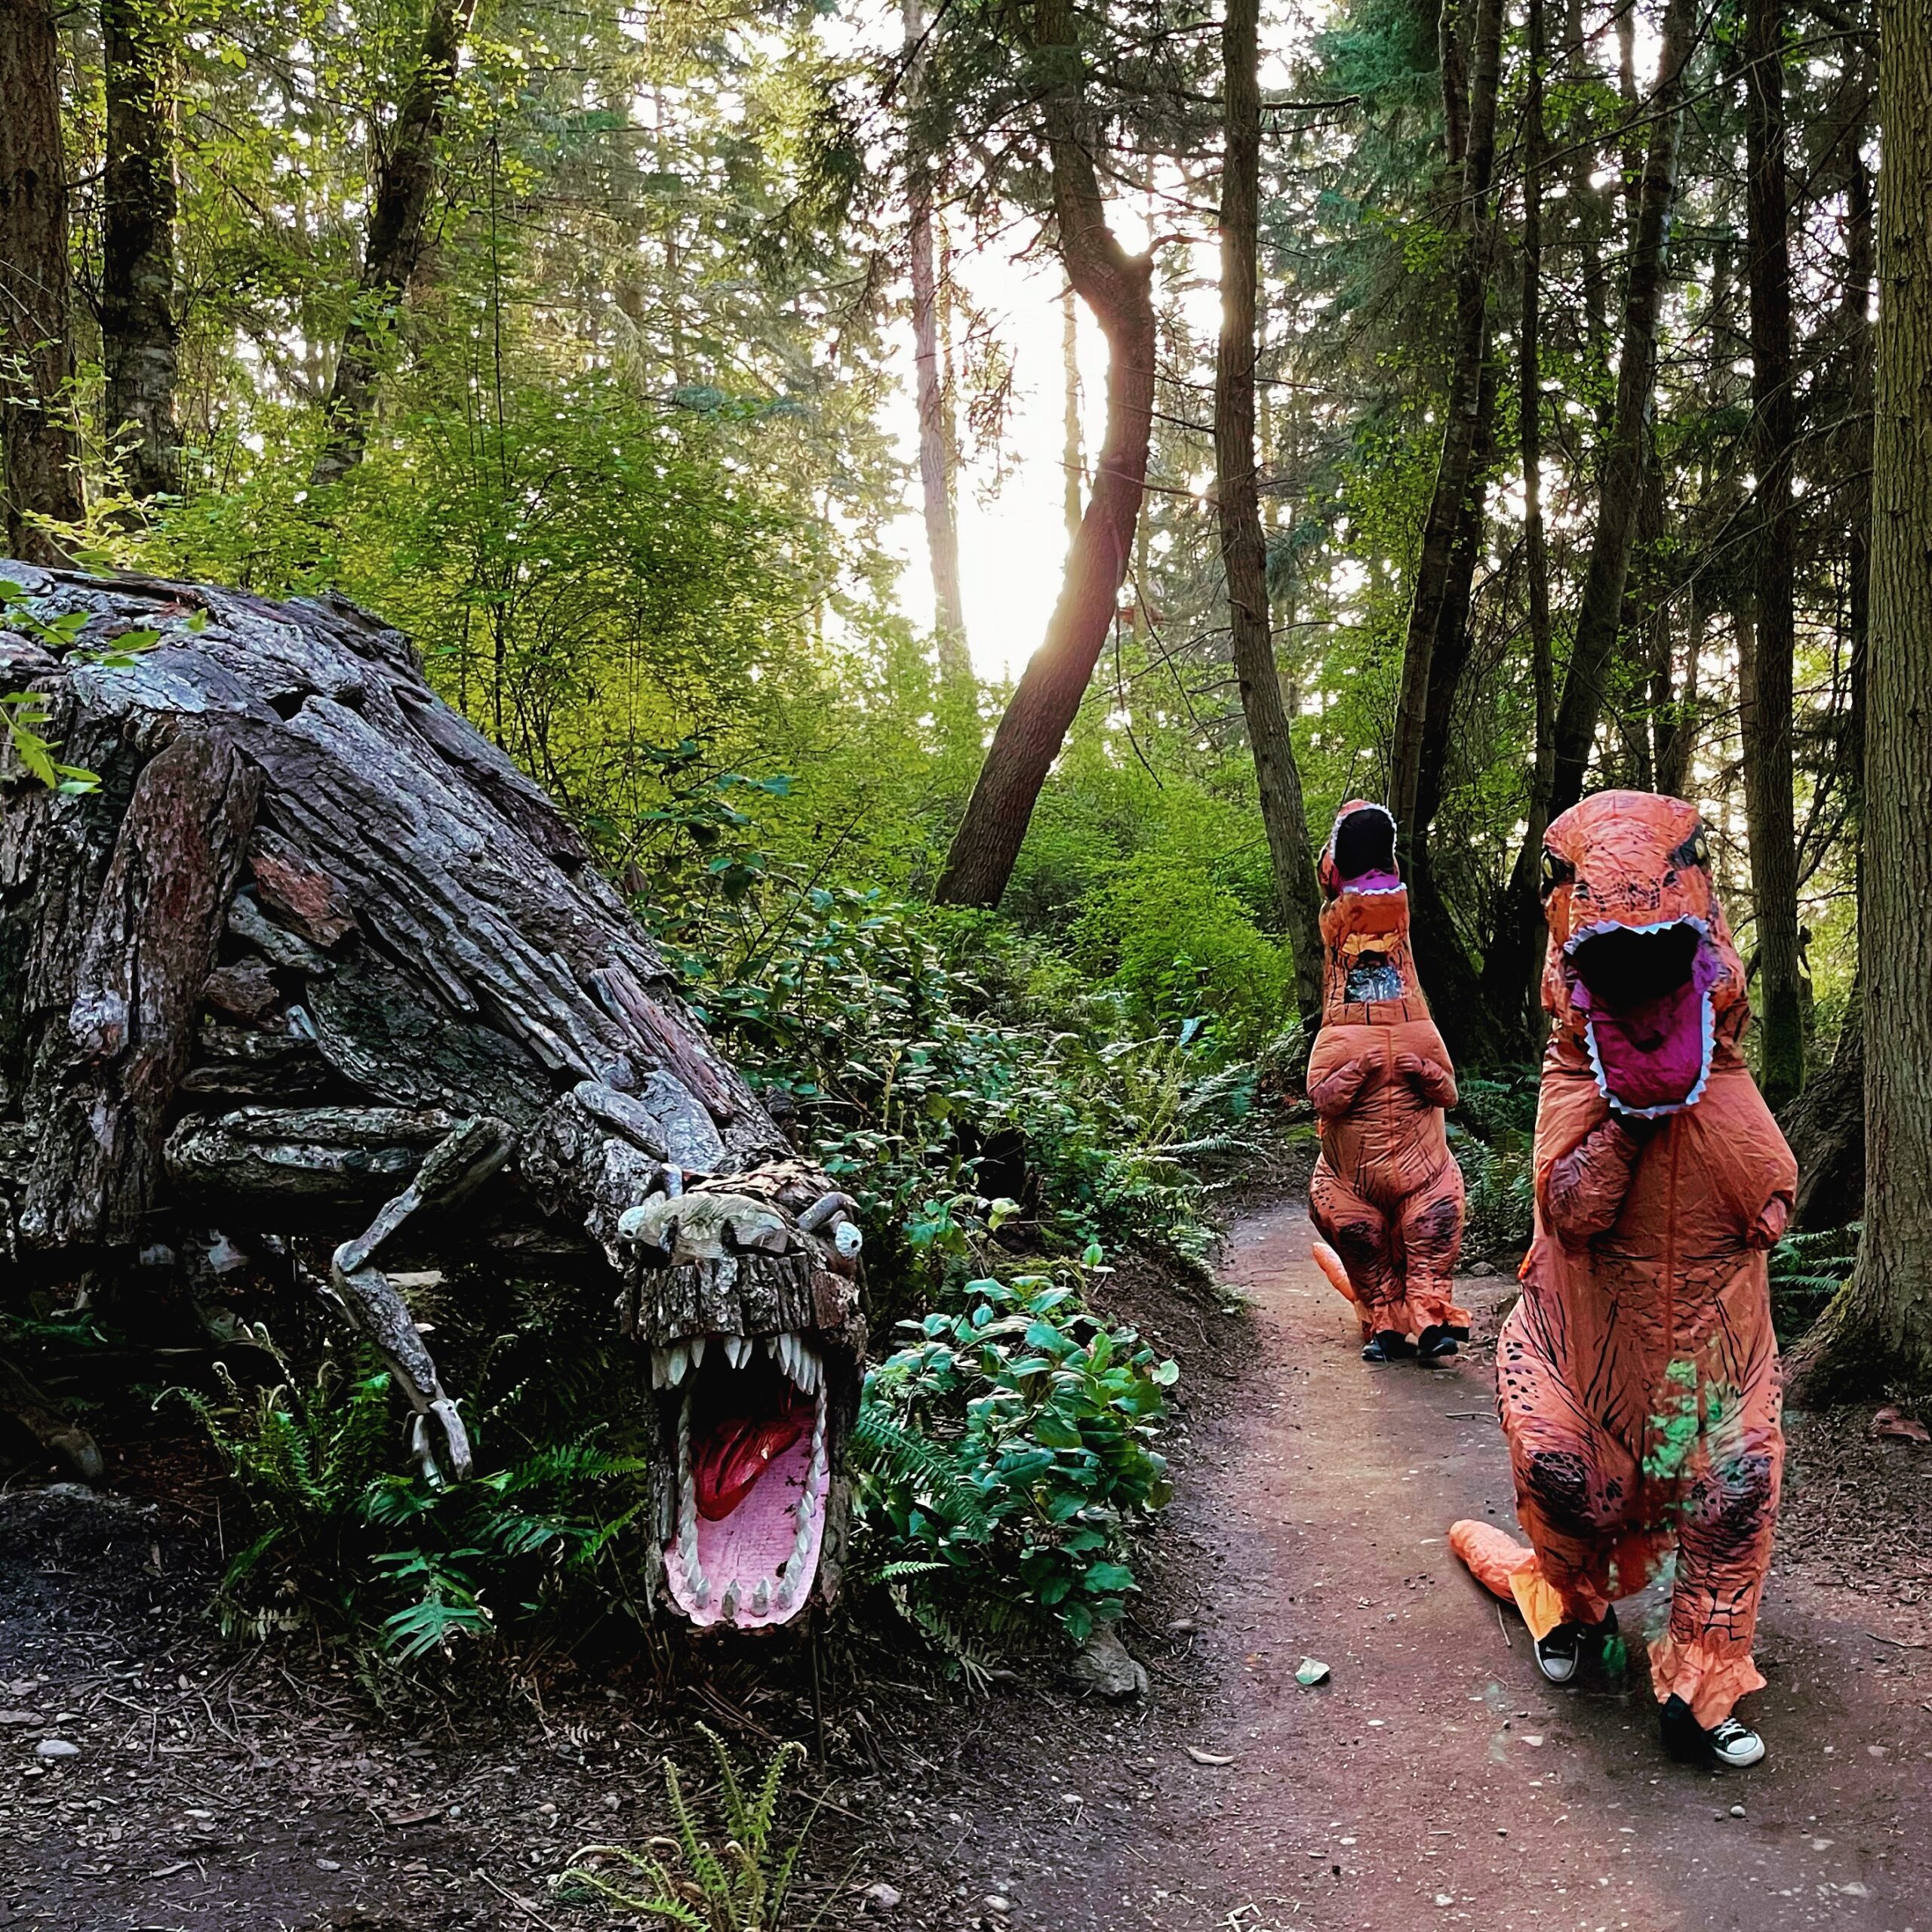 Tyrannosaurus Rex dinosaurs party with T Rex by Joe Treat at Price Sculpture Forest - photo and dinosaurs by Jackie Albor of Issaquah WA